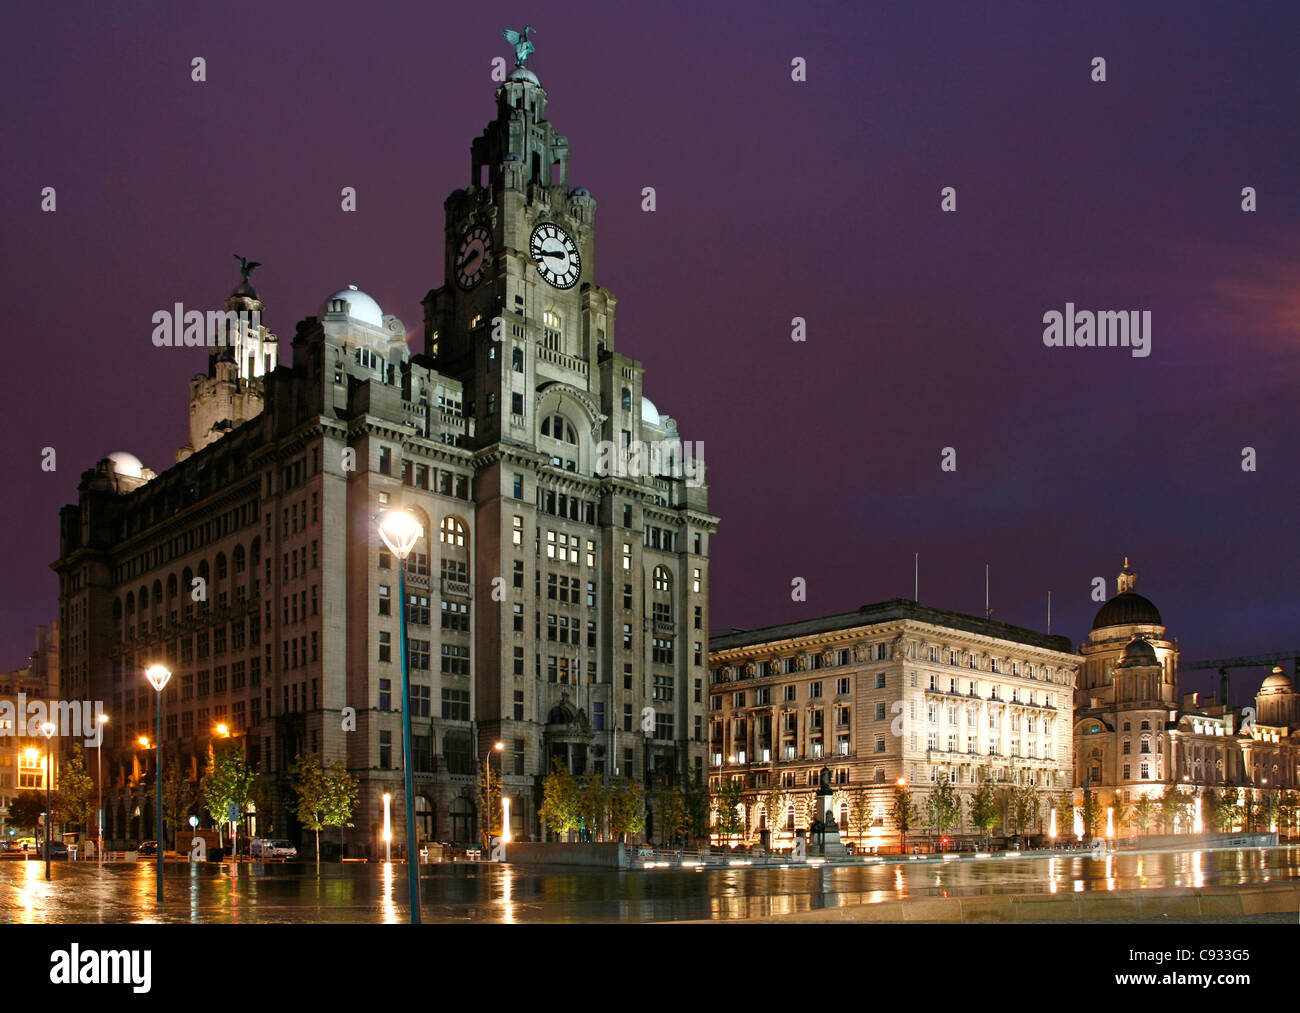 The Royal Liver Building is a Grade I listed building located in Liverpool, England. Stock Photo